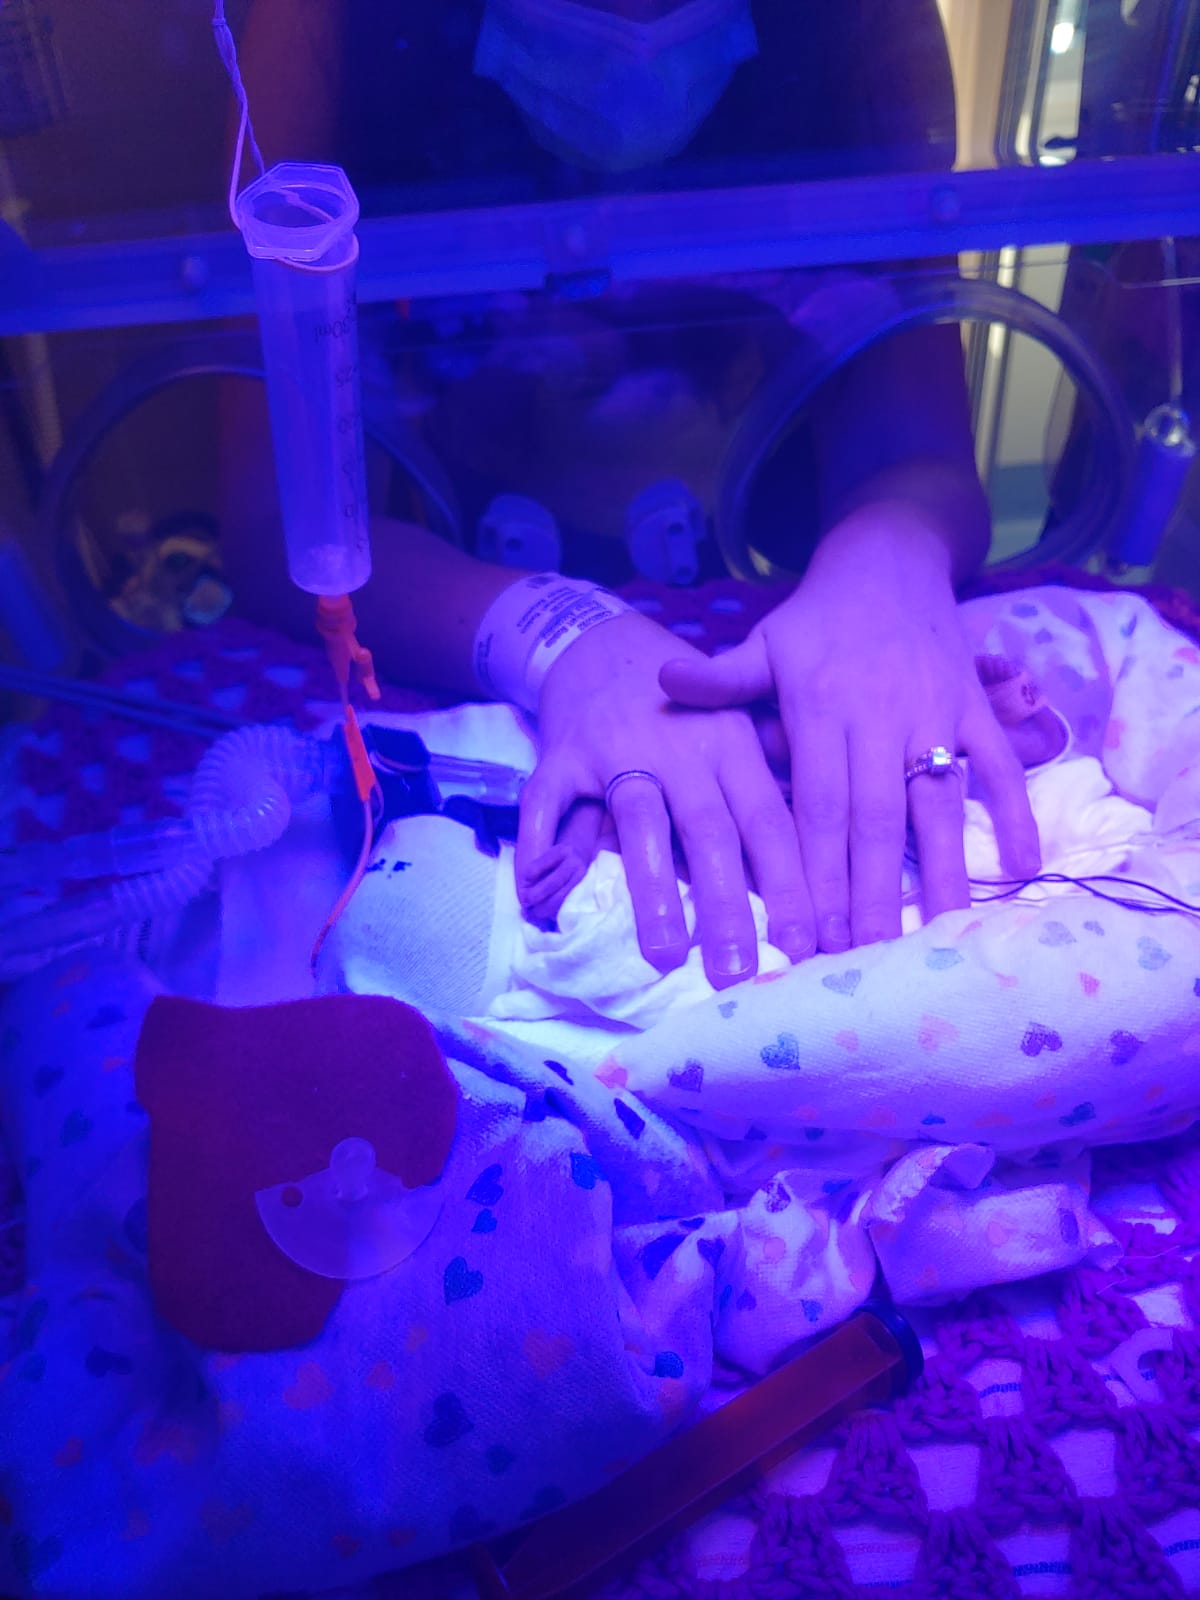 A mother's hands over a premature babies body inside an incubator.